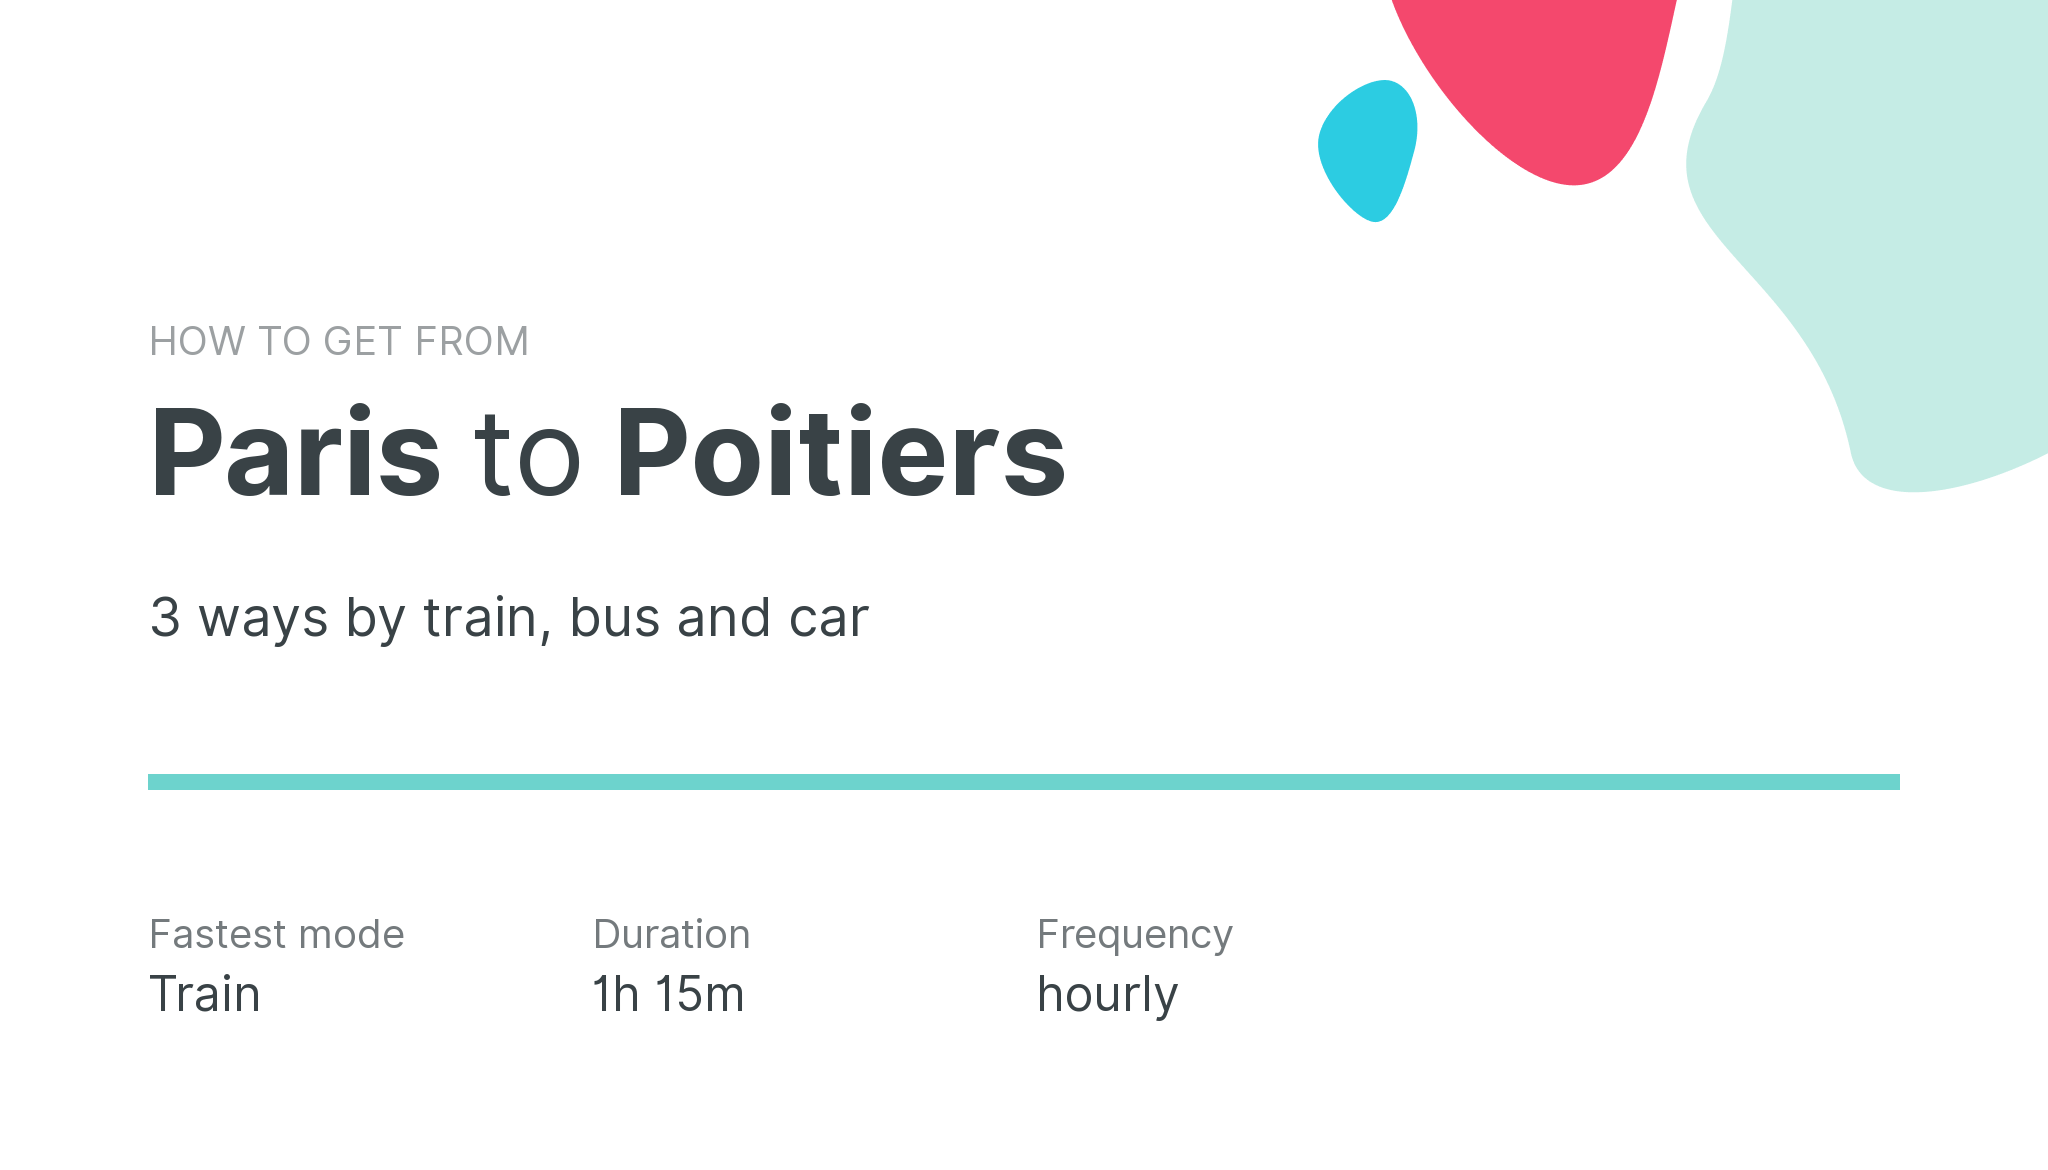 How do I get from Paris to Poitiers